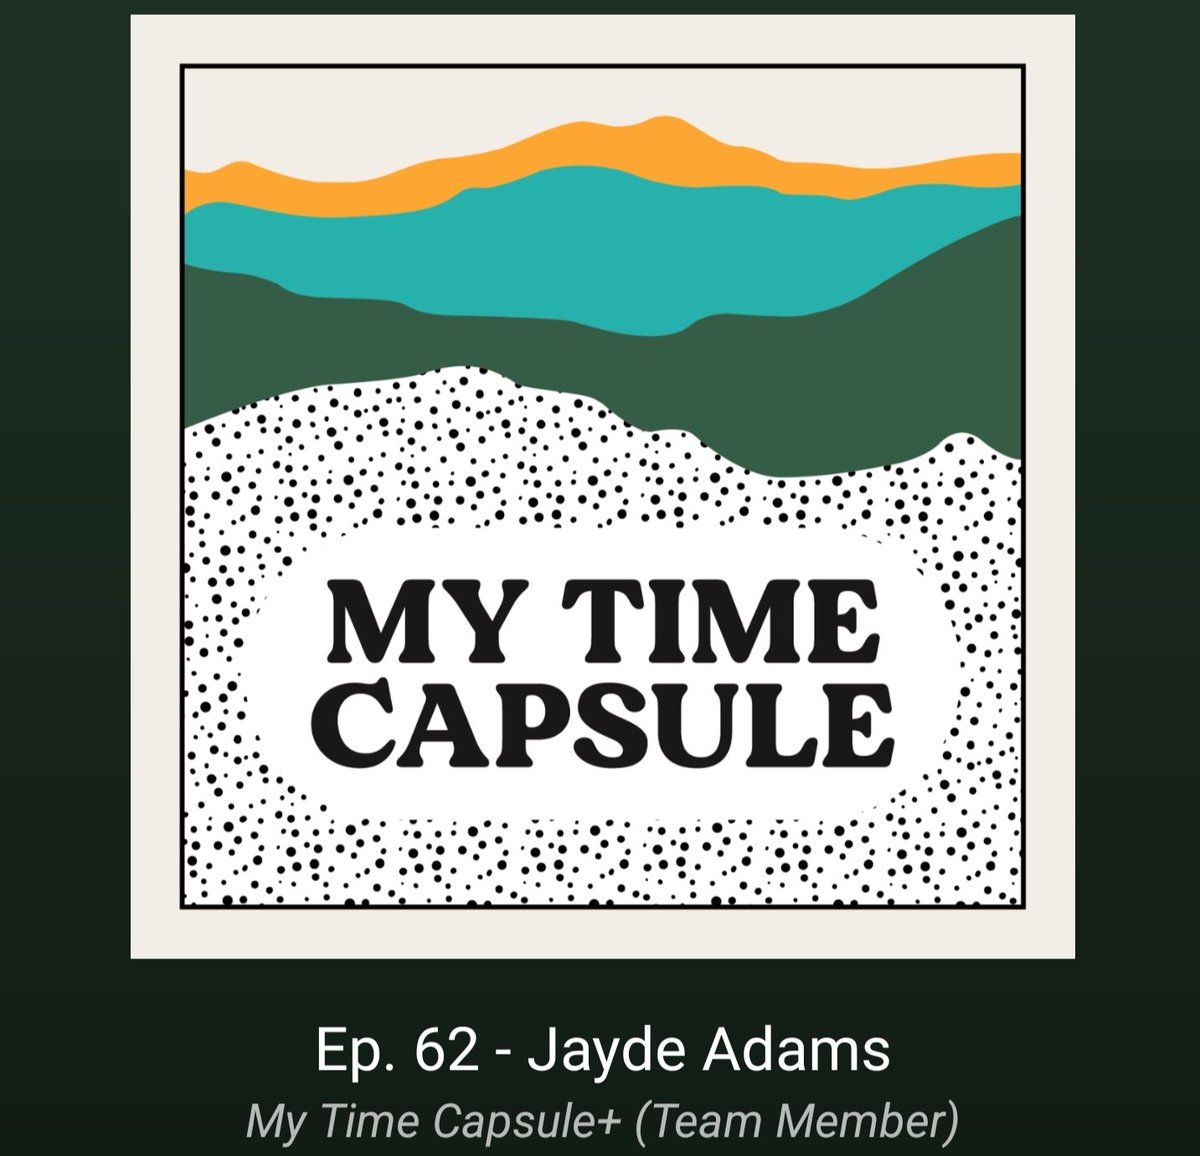 @fentonstevens speaking with @jaydeadams on @MyTCpod is a joy to listen too. Such a funny, emotional and empowering episode. A class act from a wonderful all-round entertainer and another superb podcast episode.